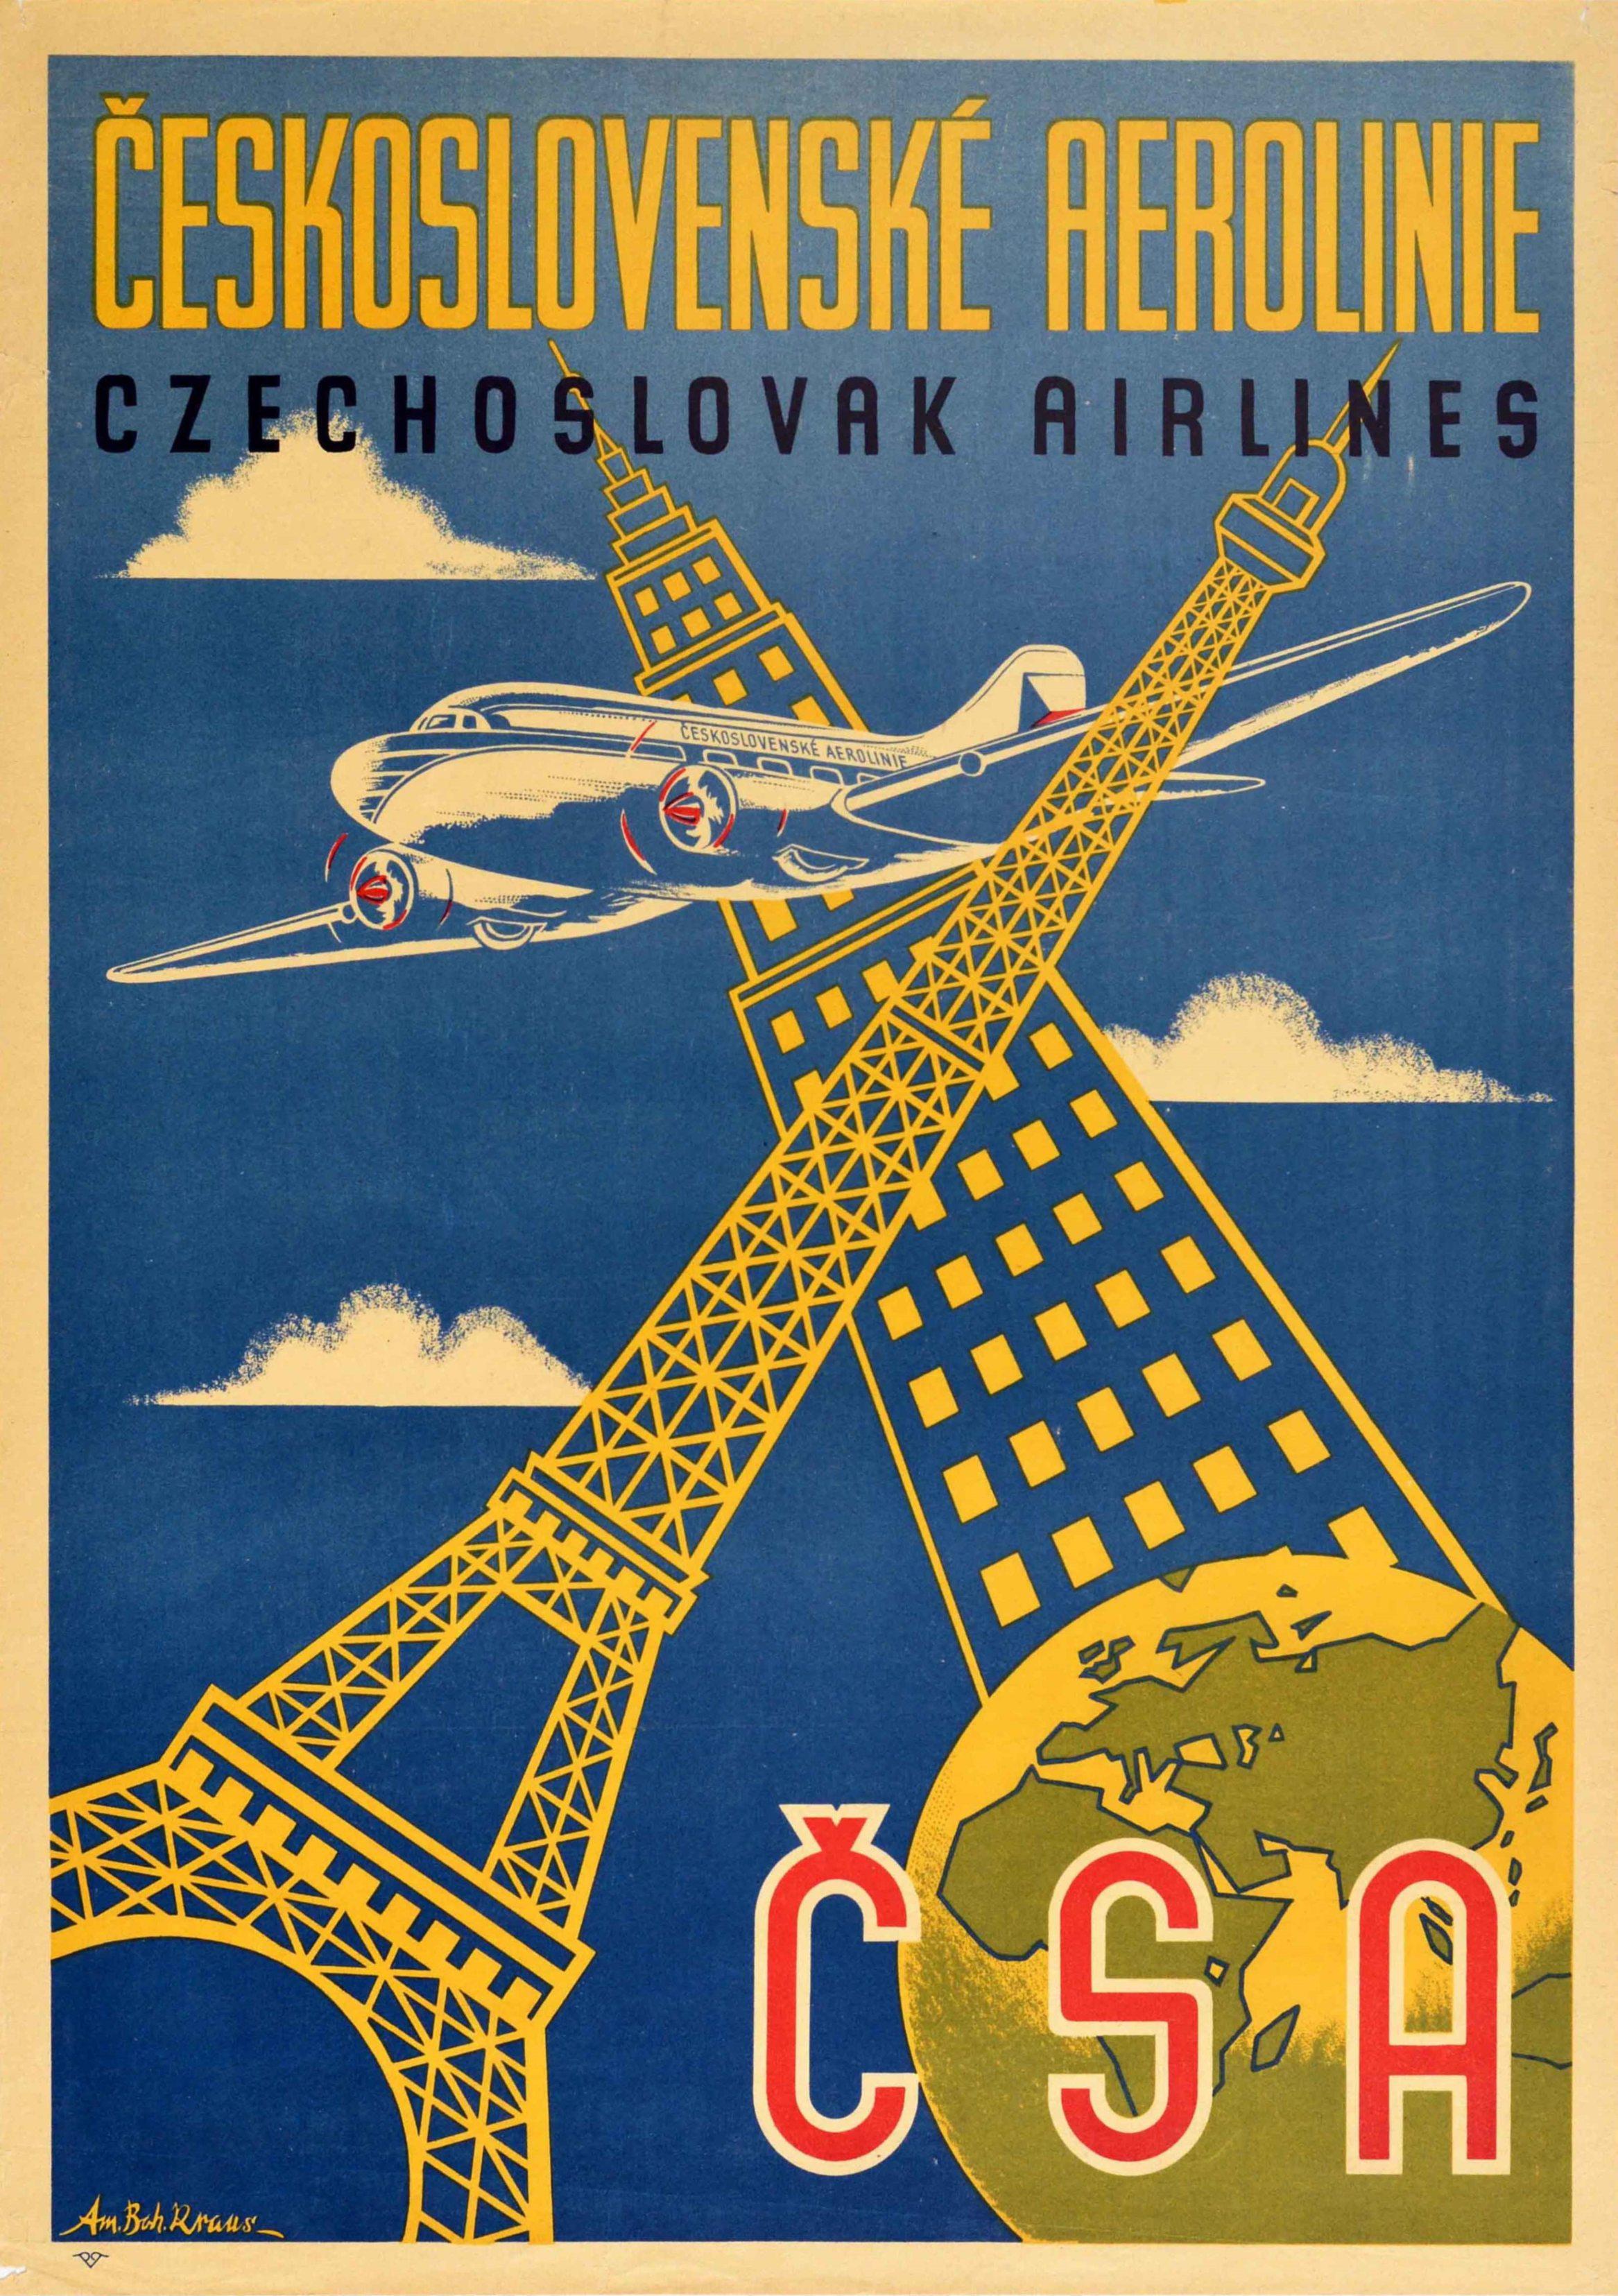 Original vintage advertising poster for Czechoslovak Airlines / Ceskoslovenske Aerolinie (CSA) featuring a great graphic design with yellow outlines of the Empire State Building in New York USA and the Eiffel Tour in Paris France at an angle with a